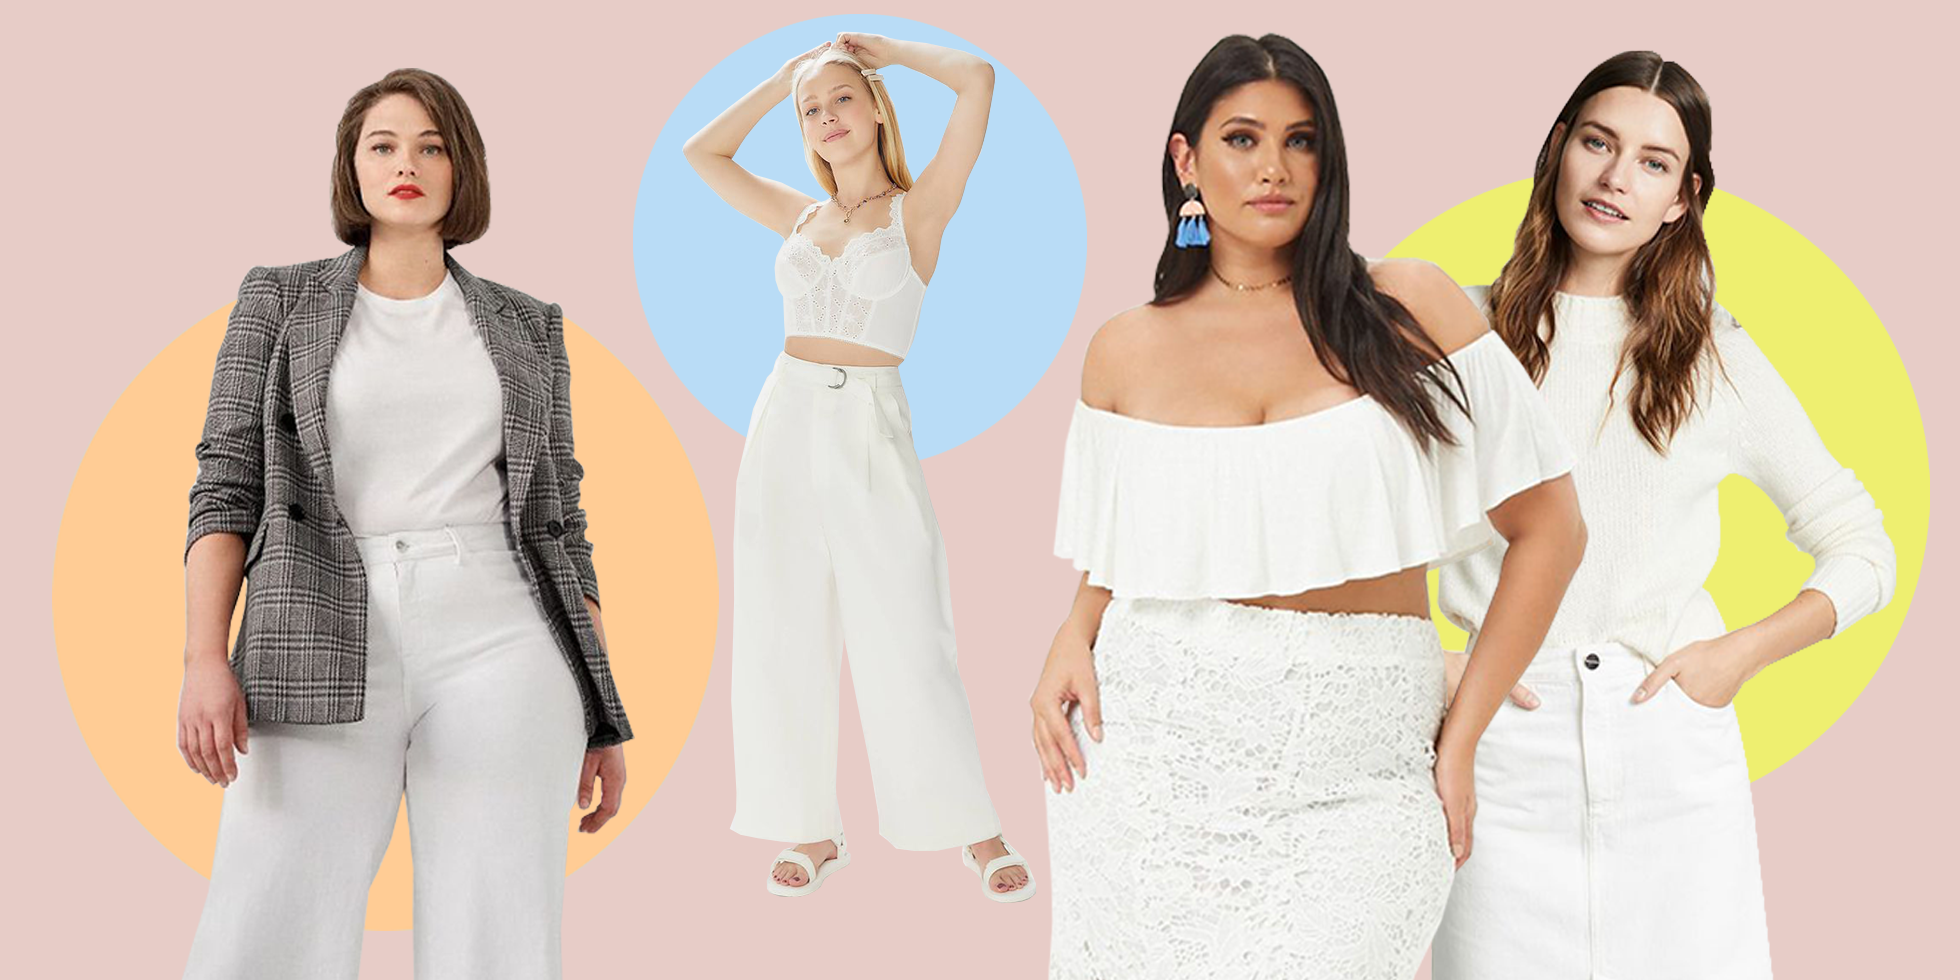 all white summer outfit ideas